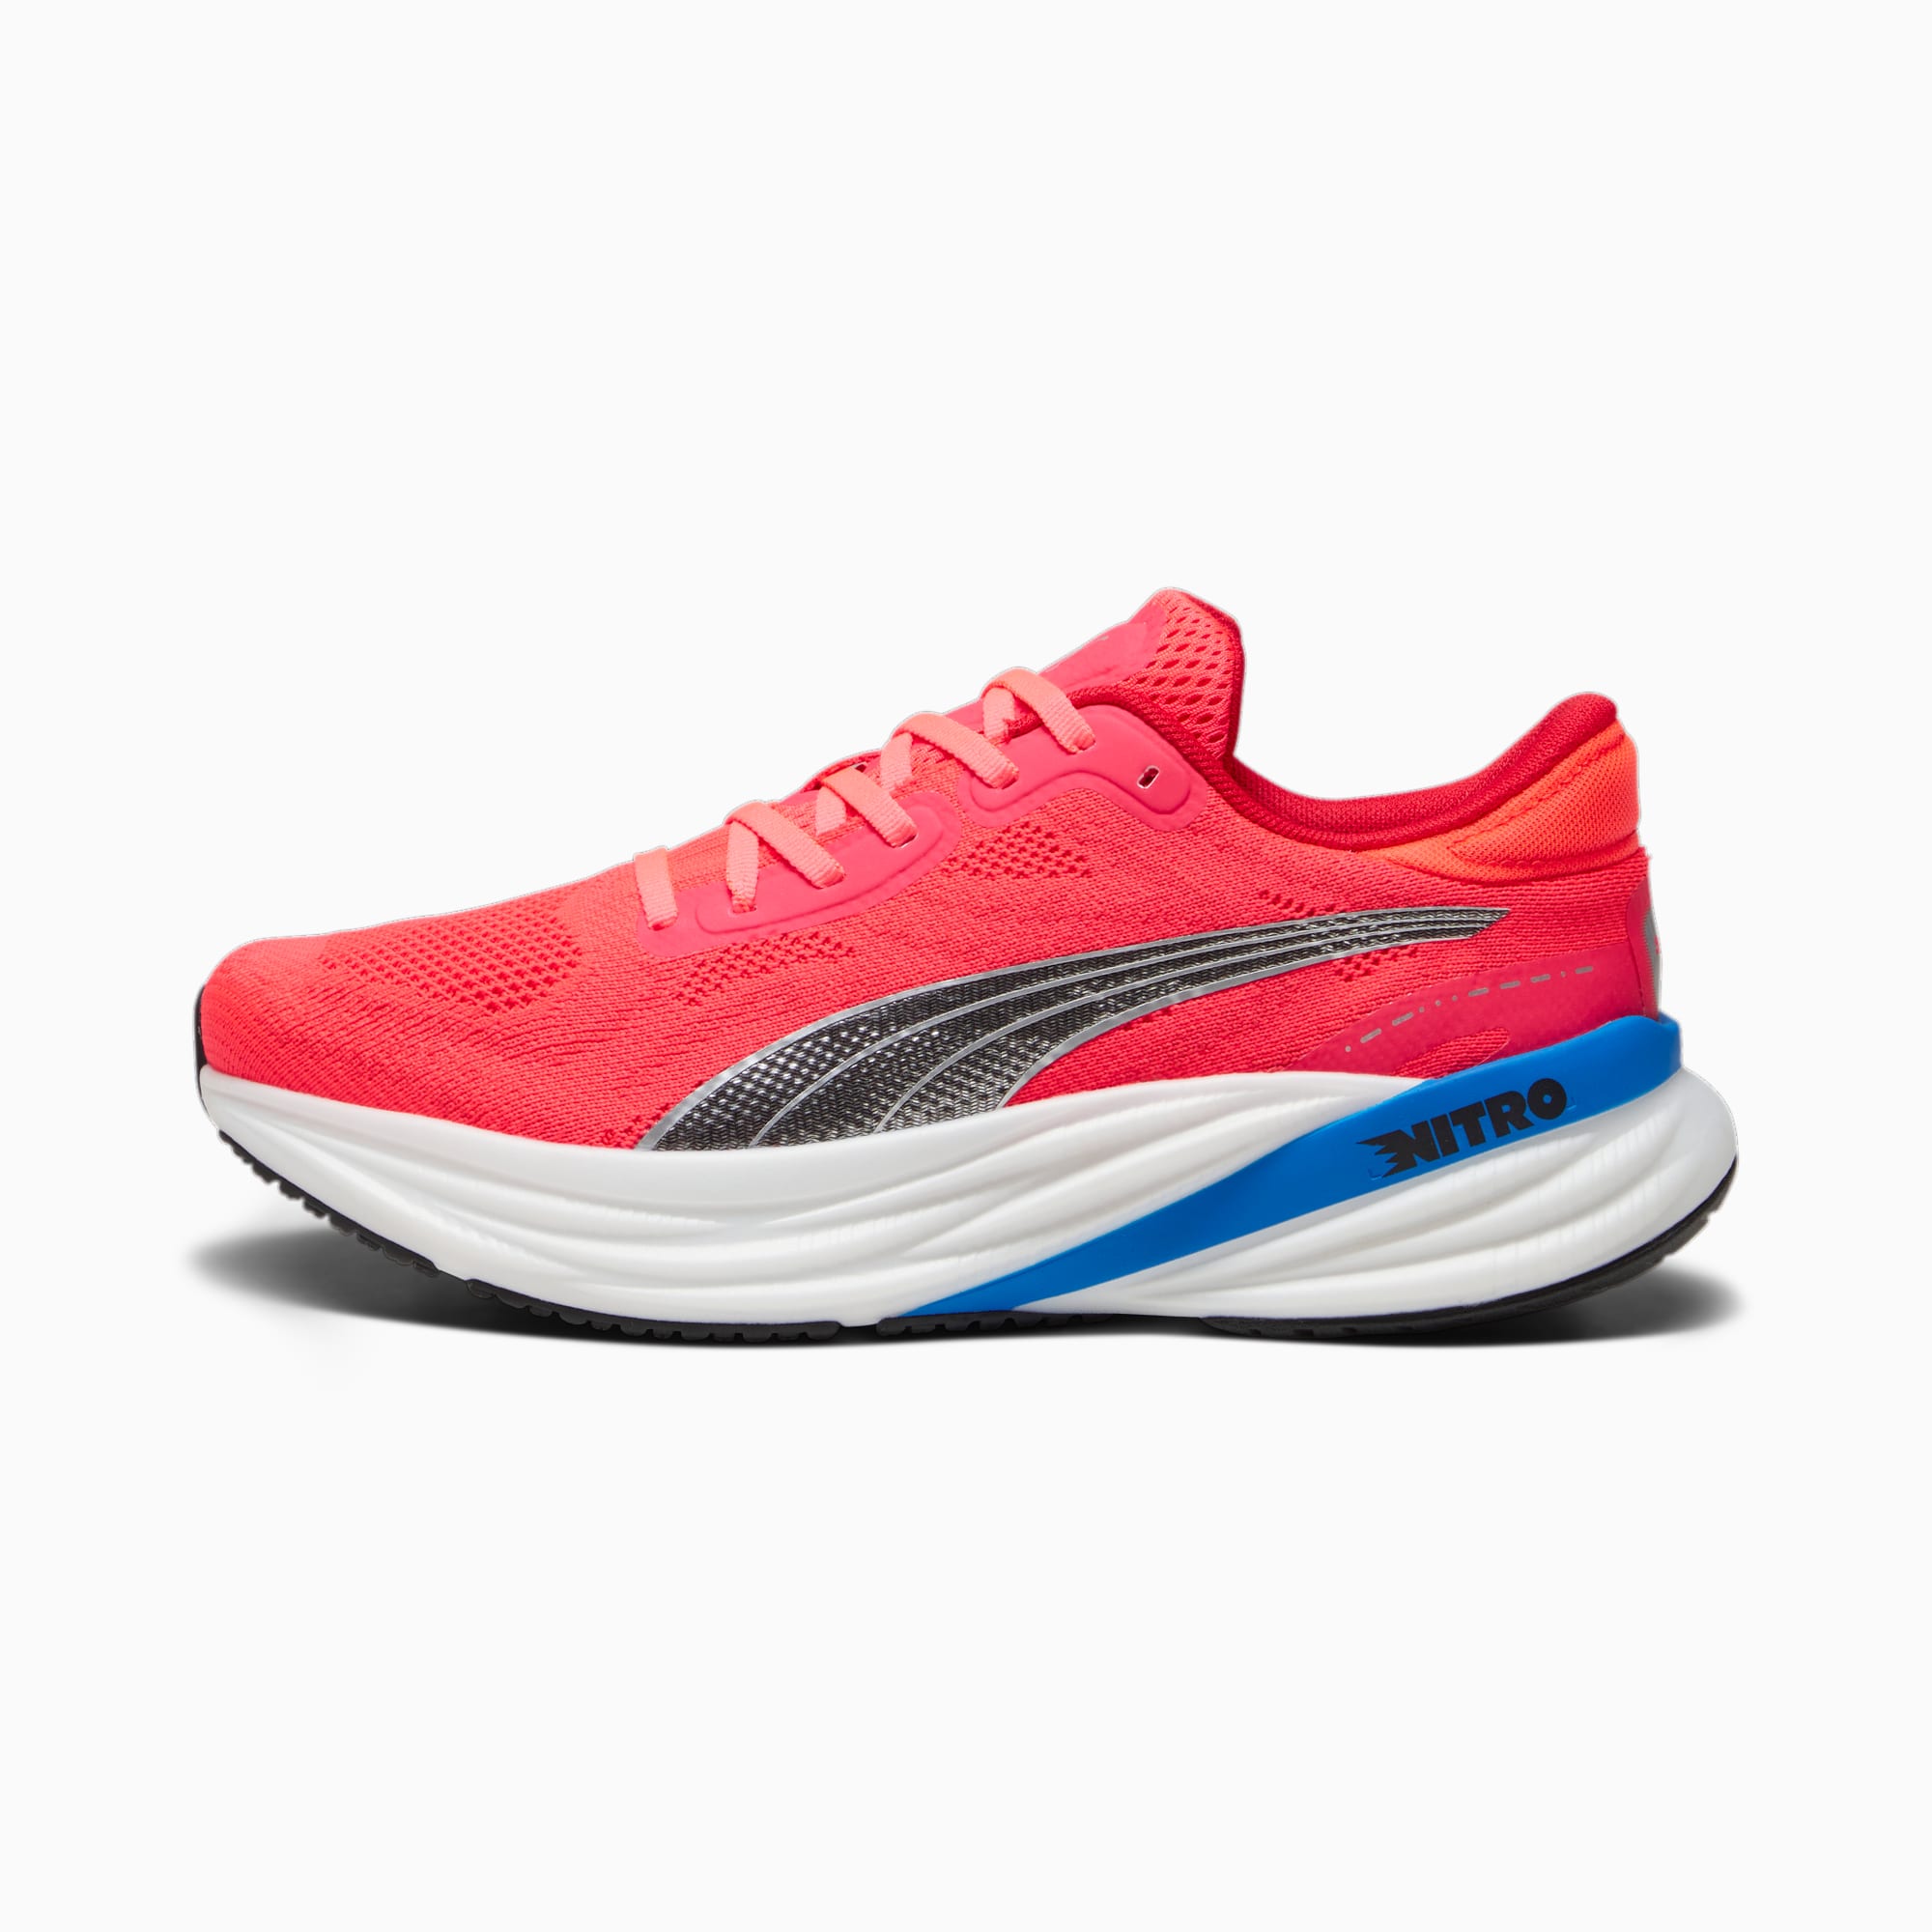 Magnify NITRO 2 Men's Running Shoes | Fire Orchid-Ultra Blue | PUMA ...